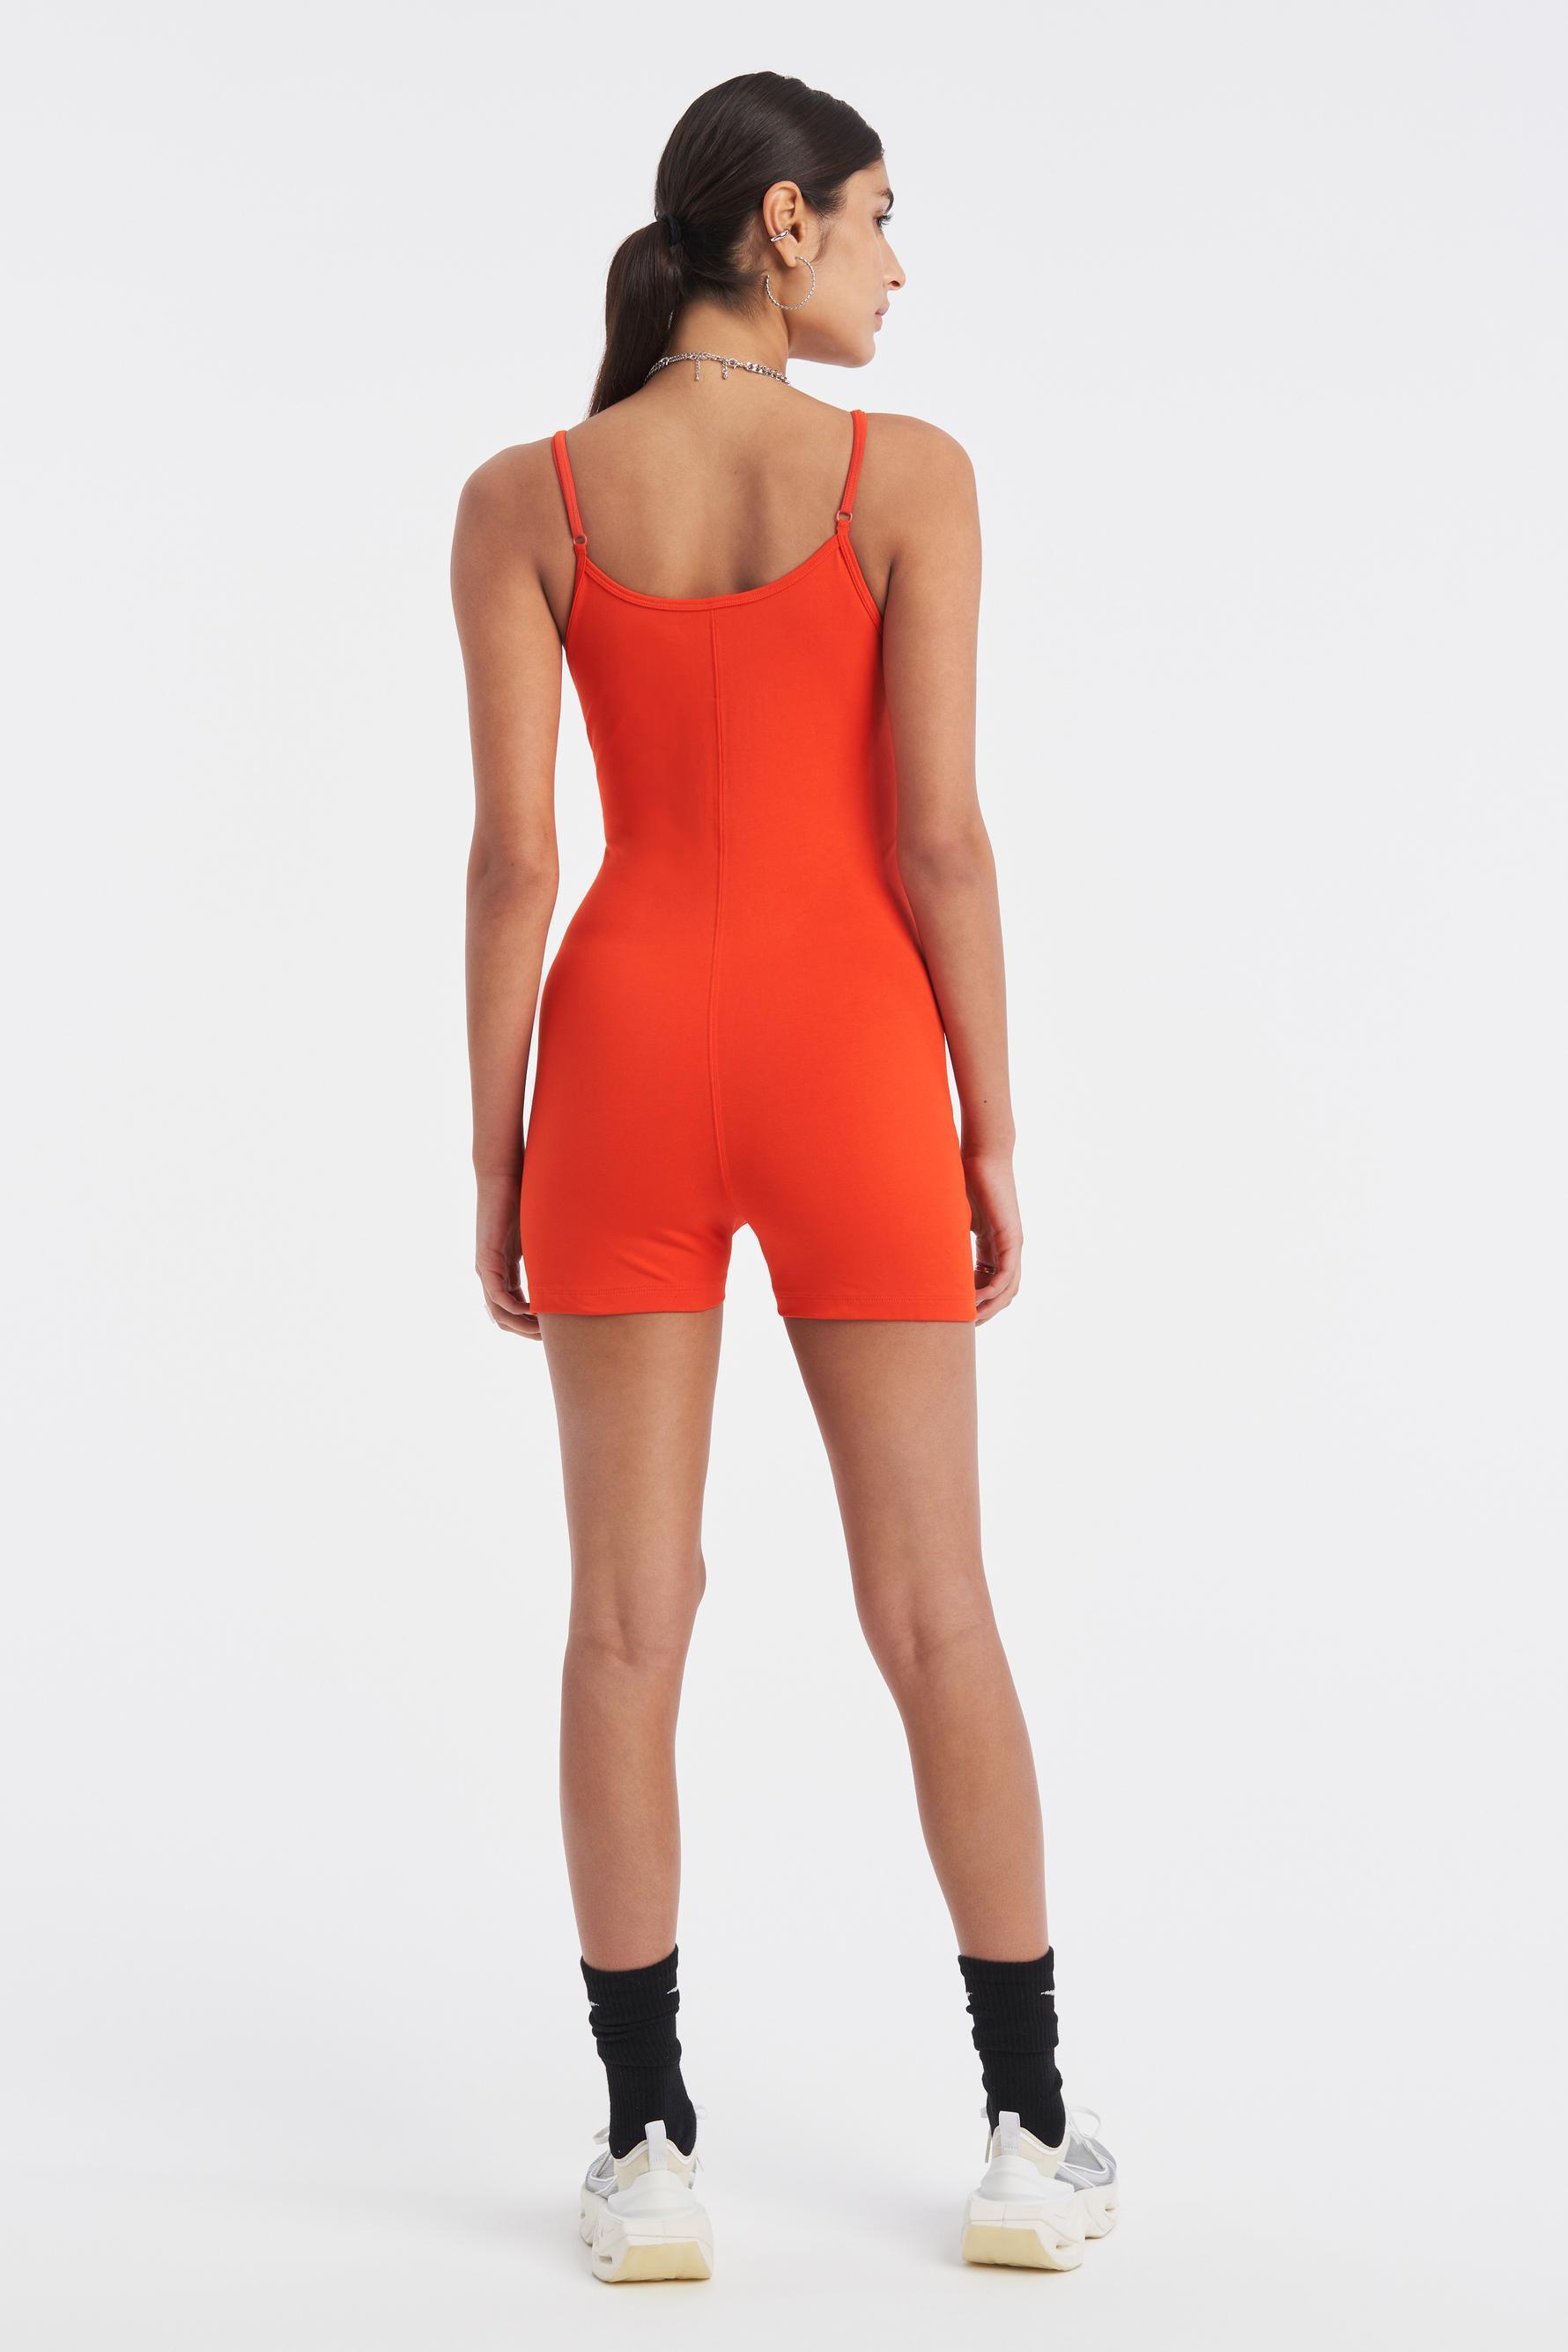 Nike Indio Onepiece in Red - Lyst